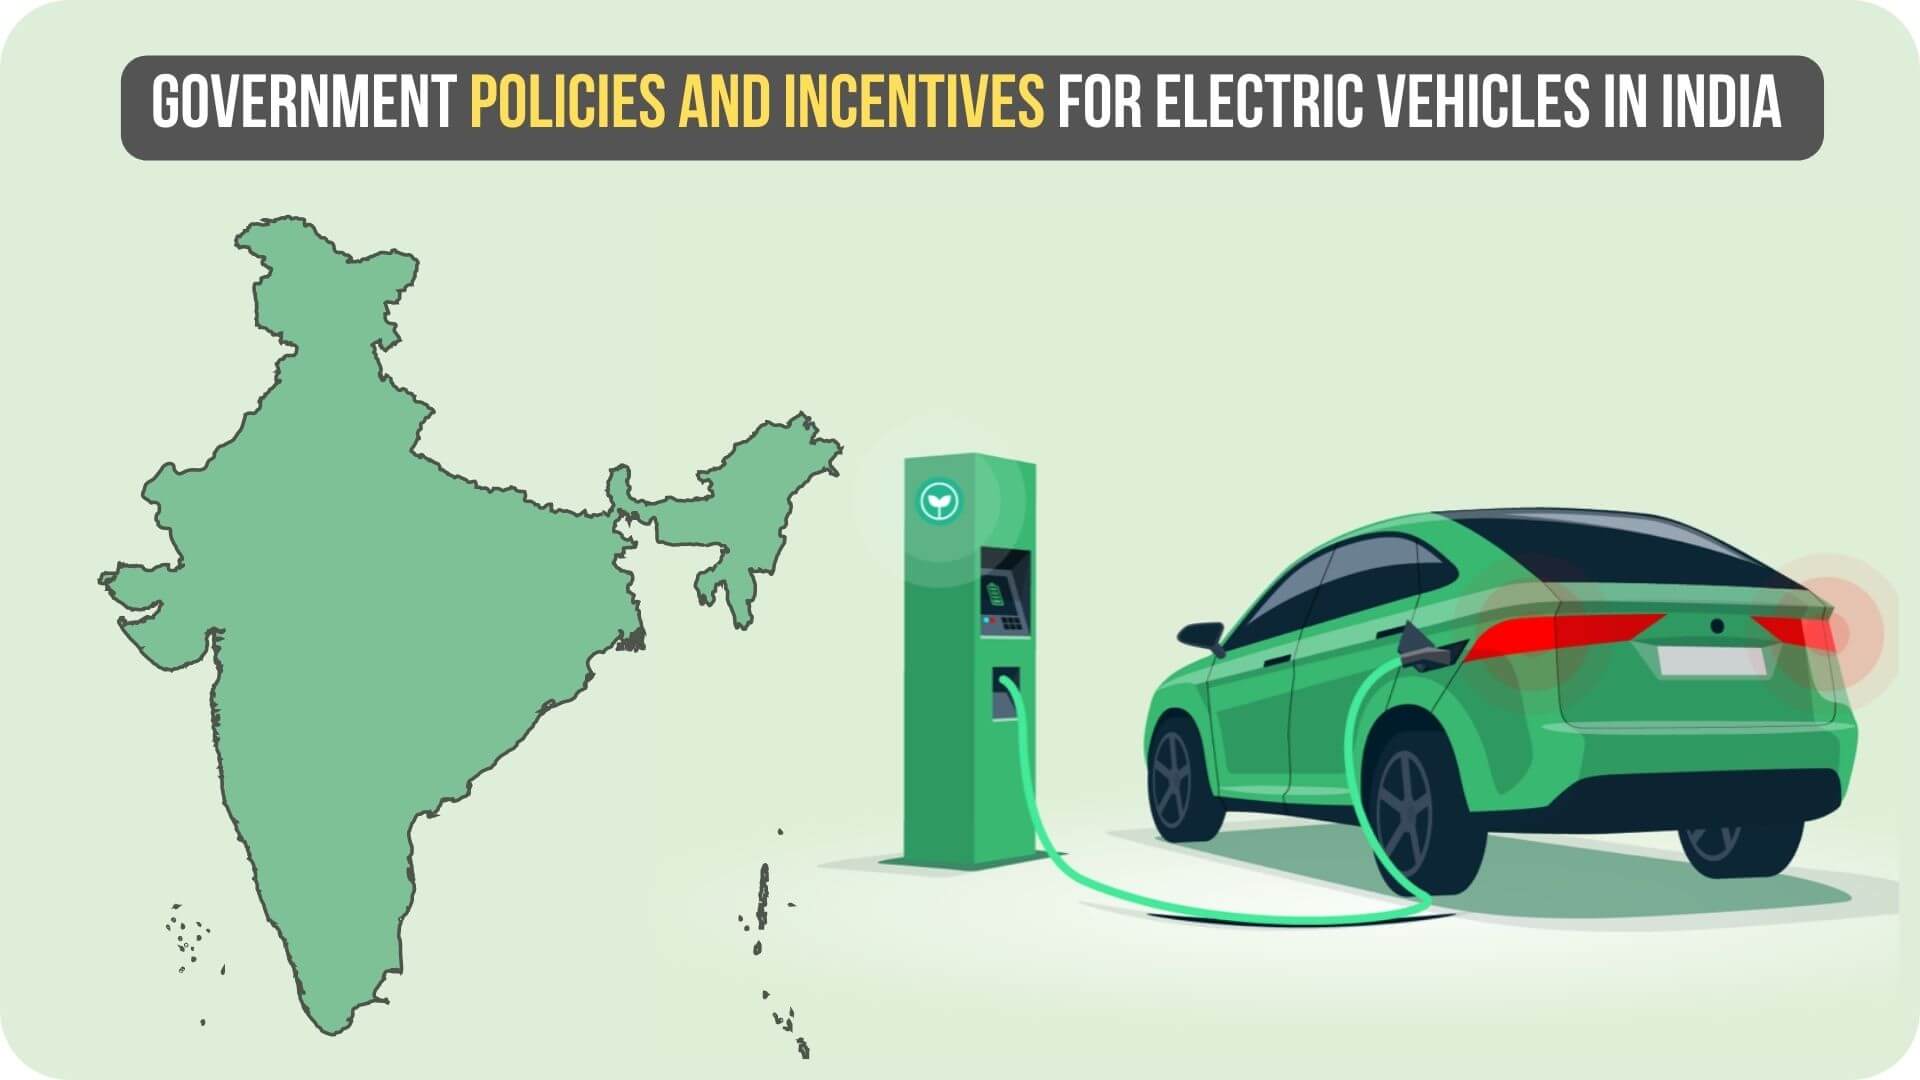 https://e-vehicleinfo.com/government-policies-and-incentives-for-electric-vehicles-in-india/